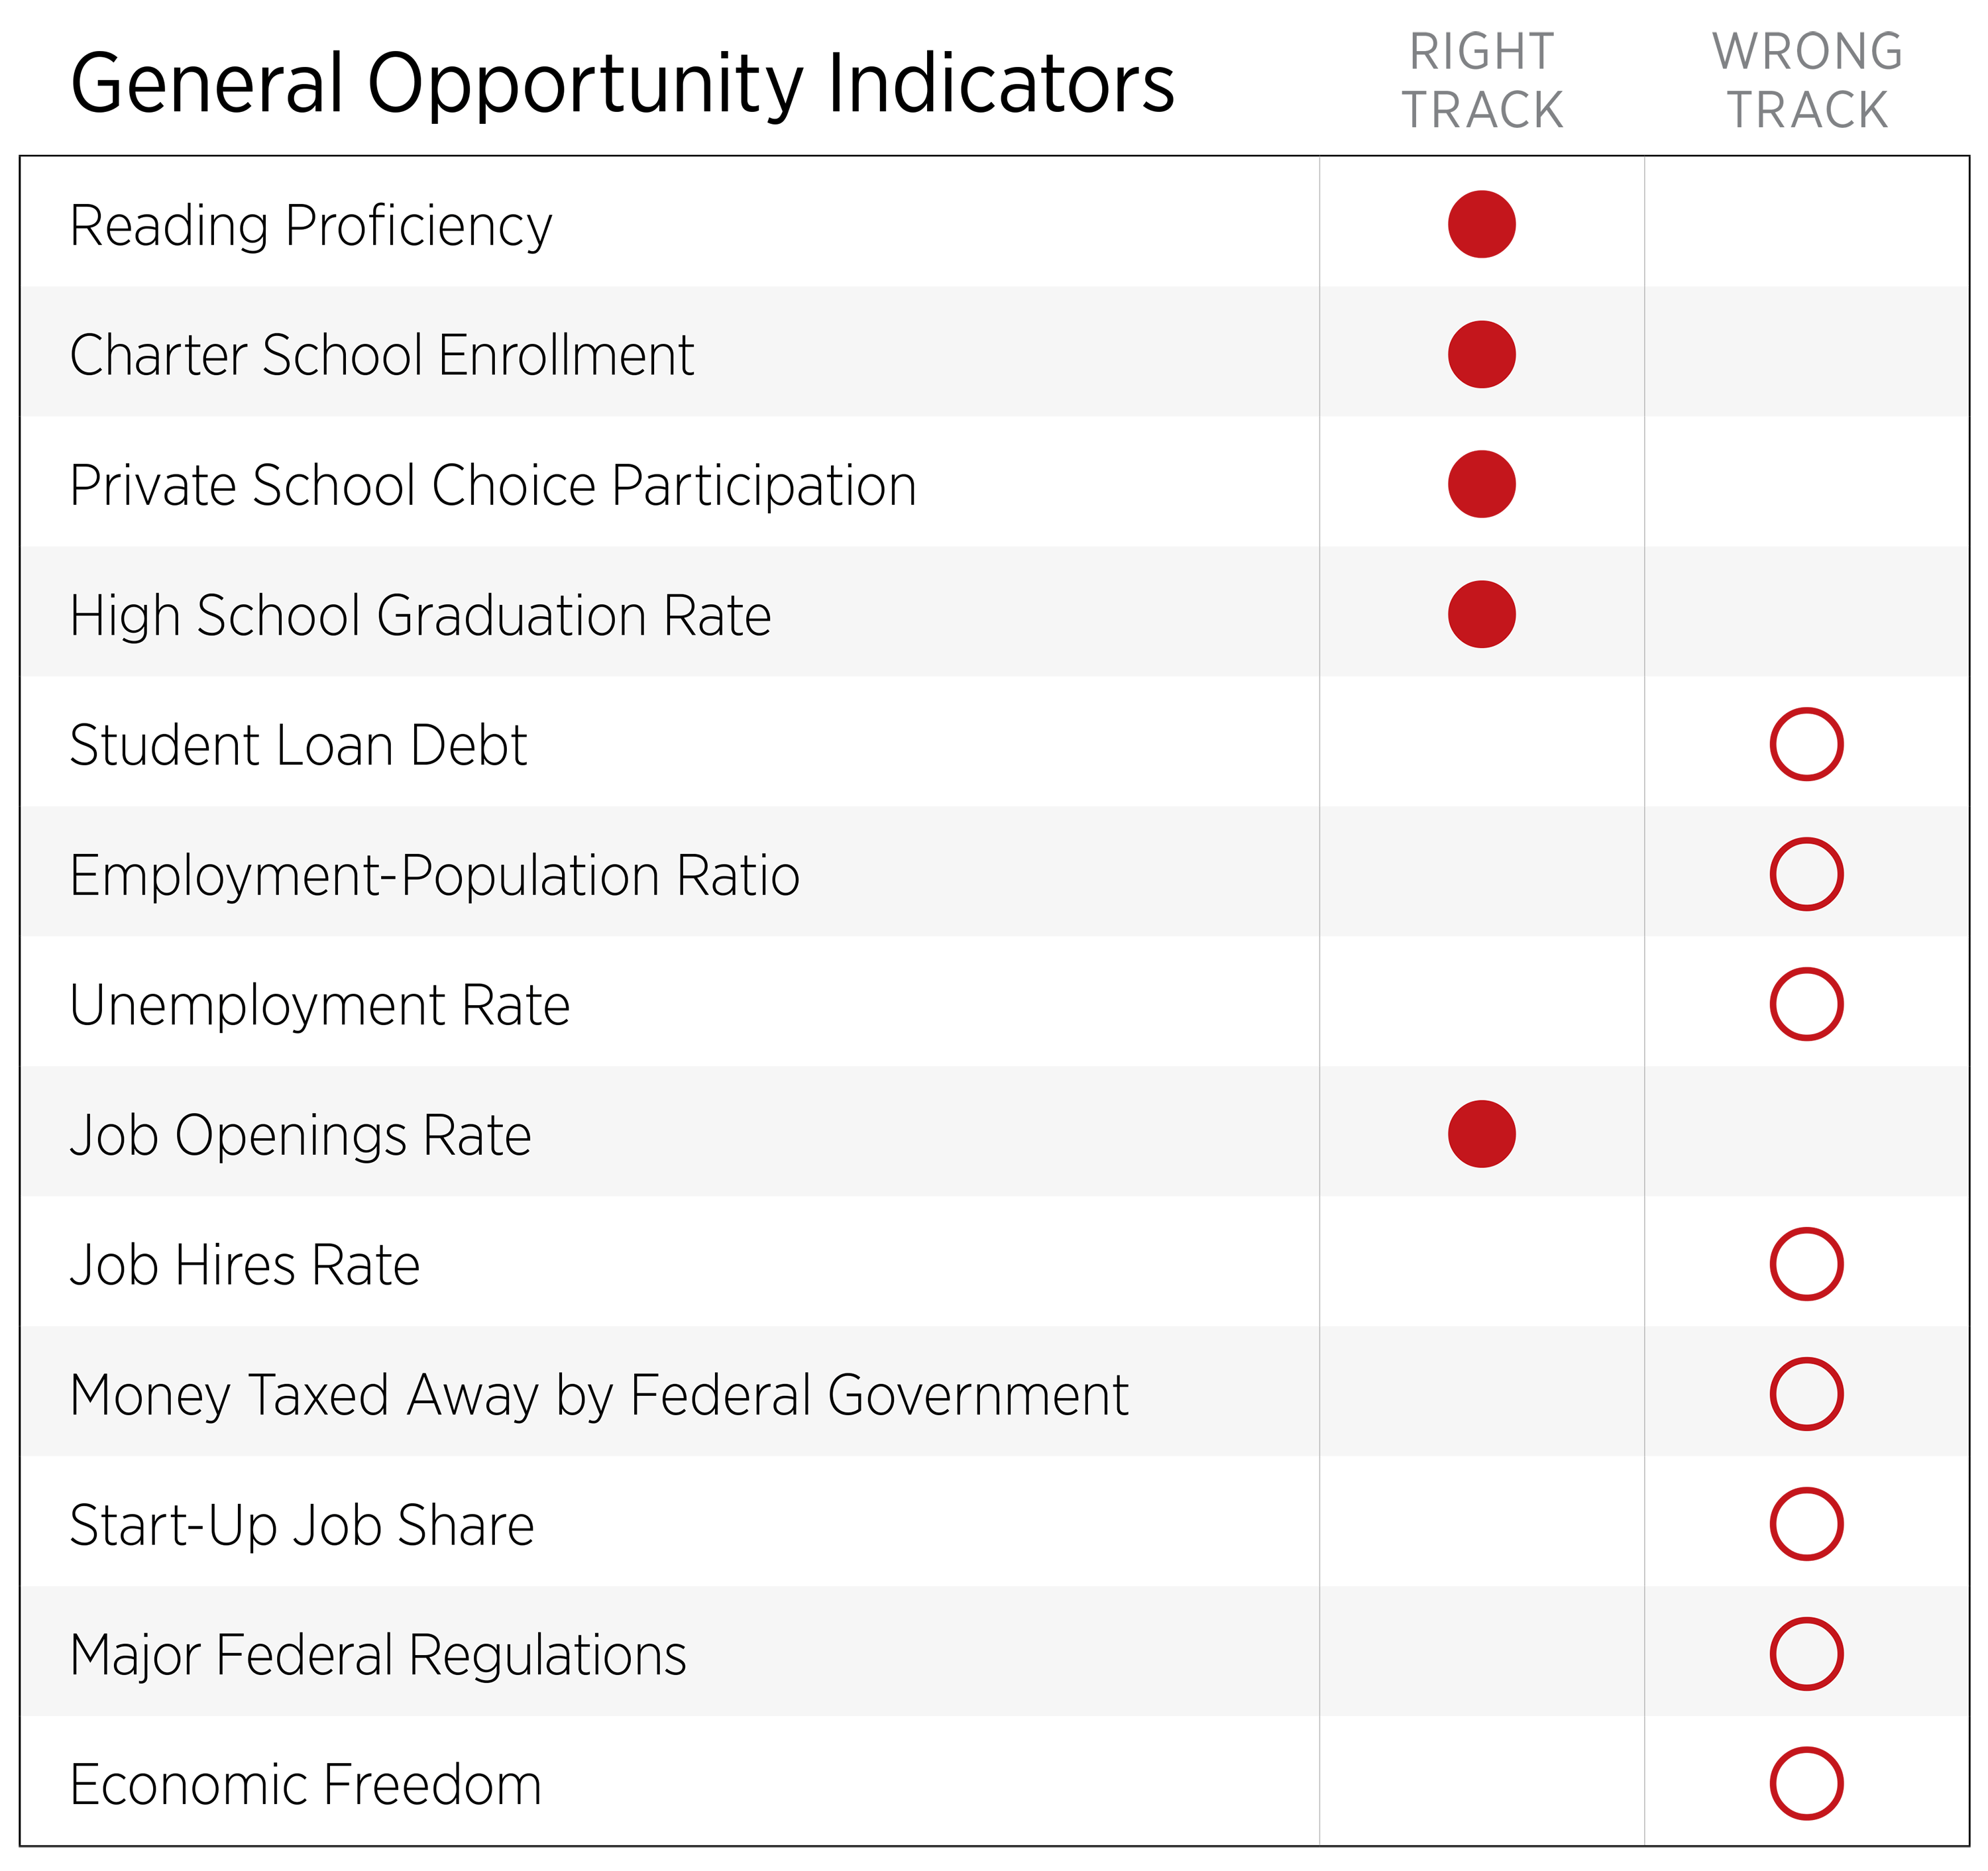 General Opportunity Indicators